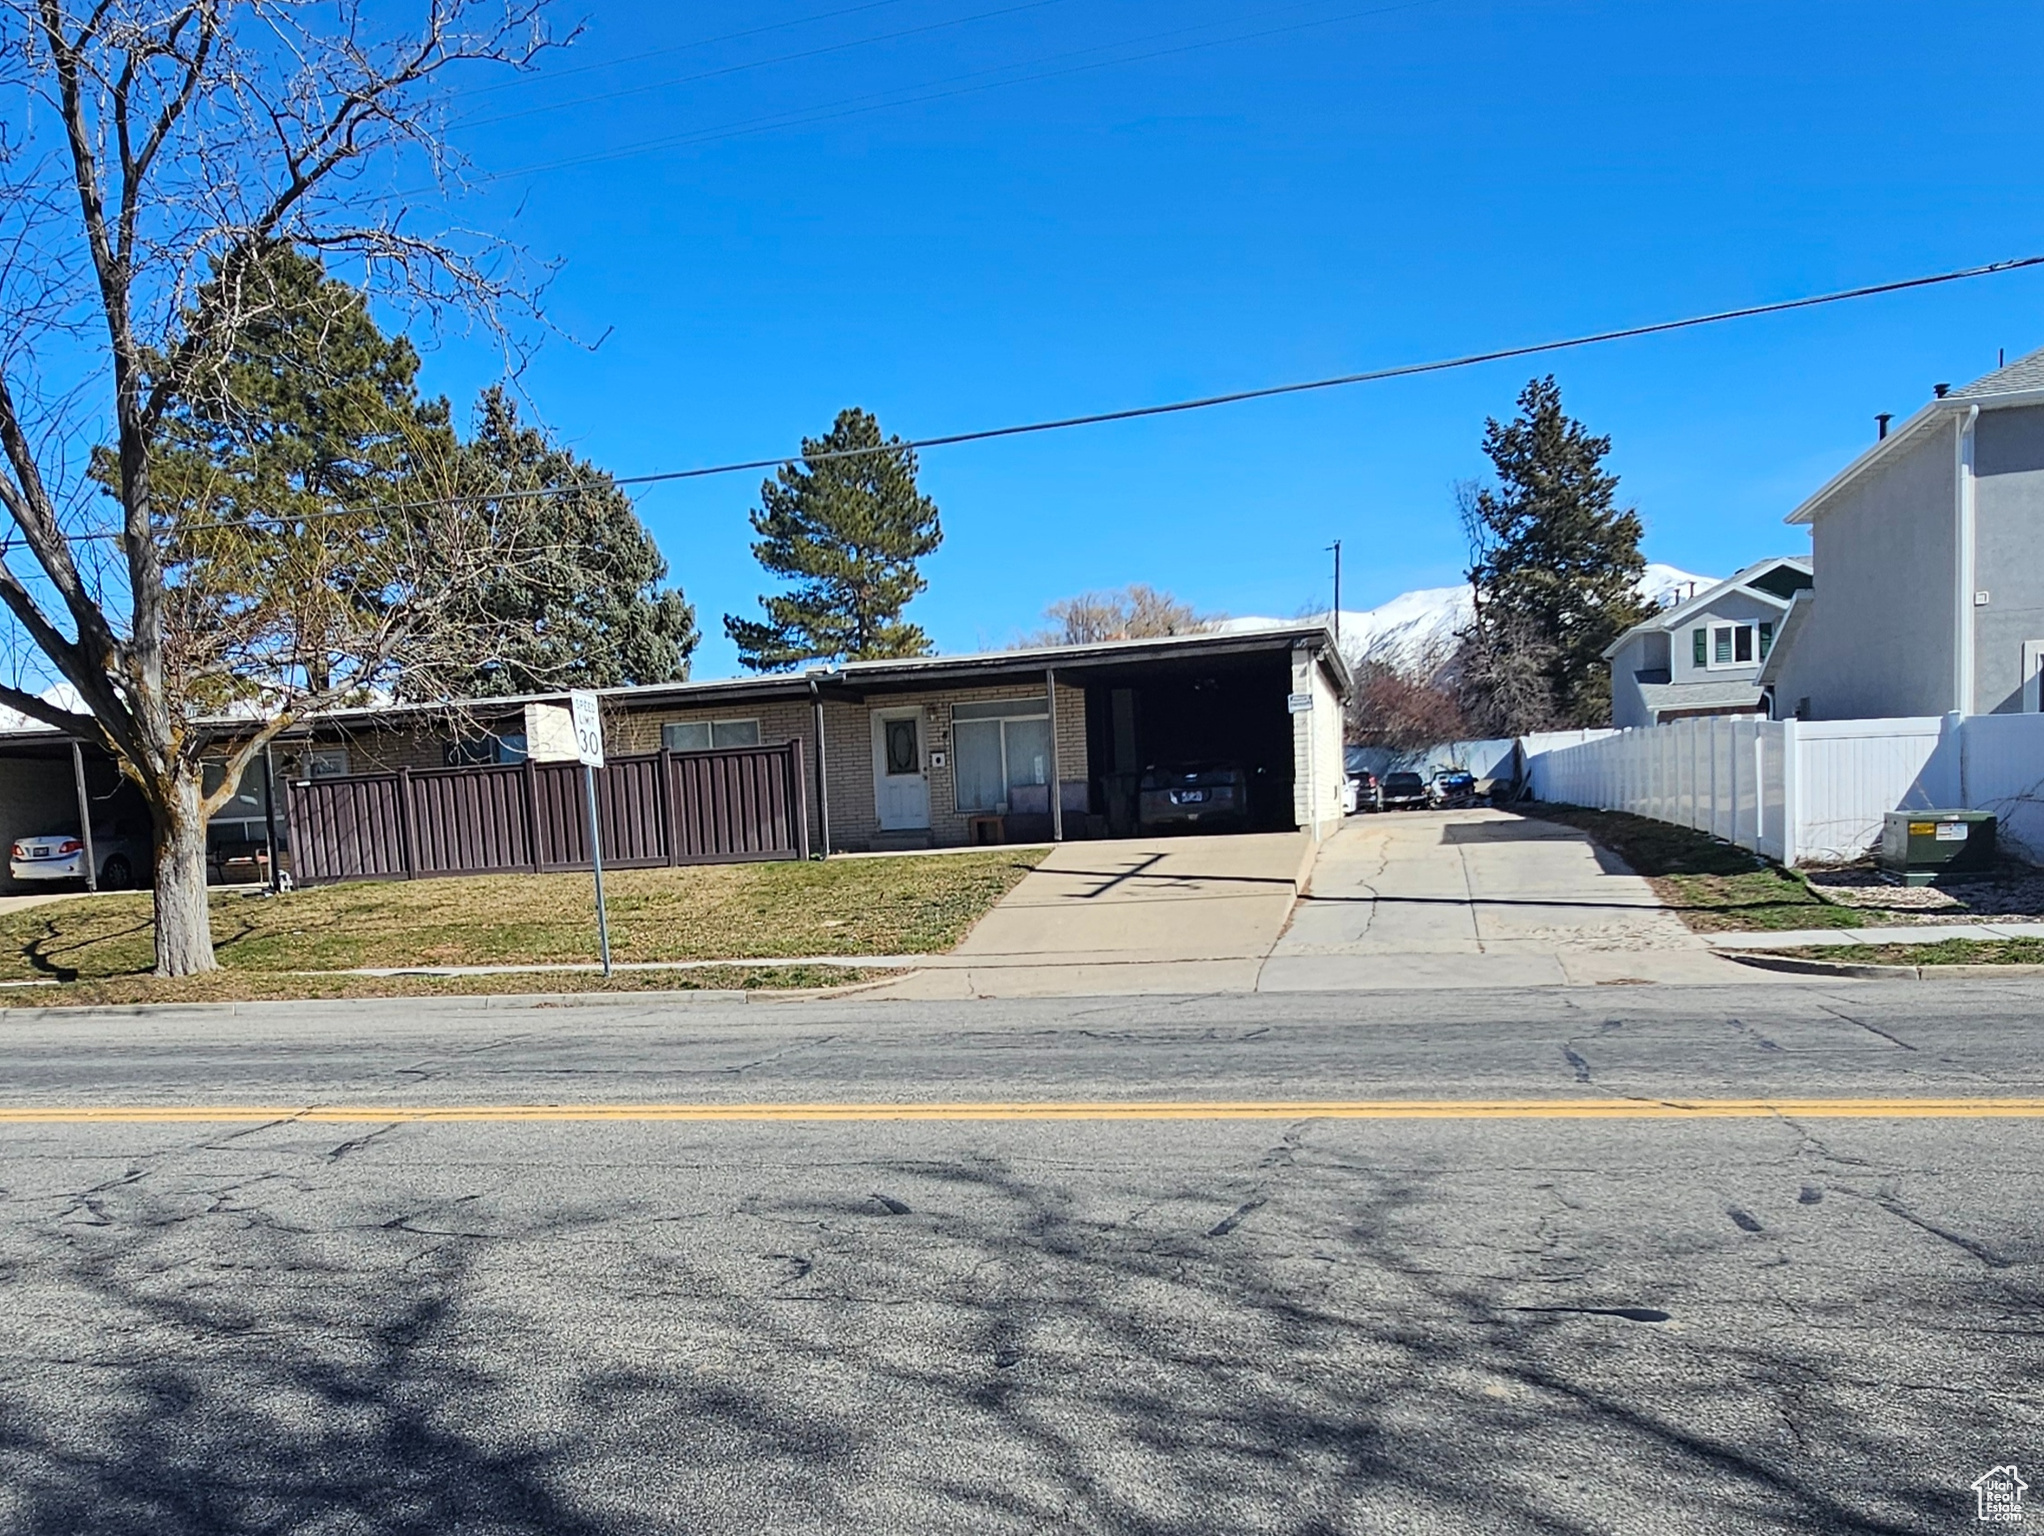 1175 S 1000 E #F 19, Clearfield, Utah 84015, 2 Bedrooms Bedrooms, 6 Rooms Rooms,1 BathroomBathrooms,Residential,For sale,1000,1983391